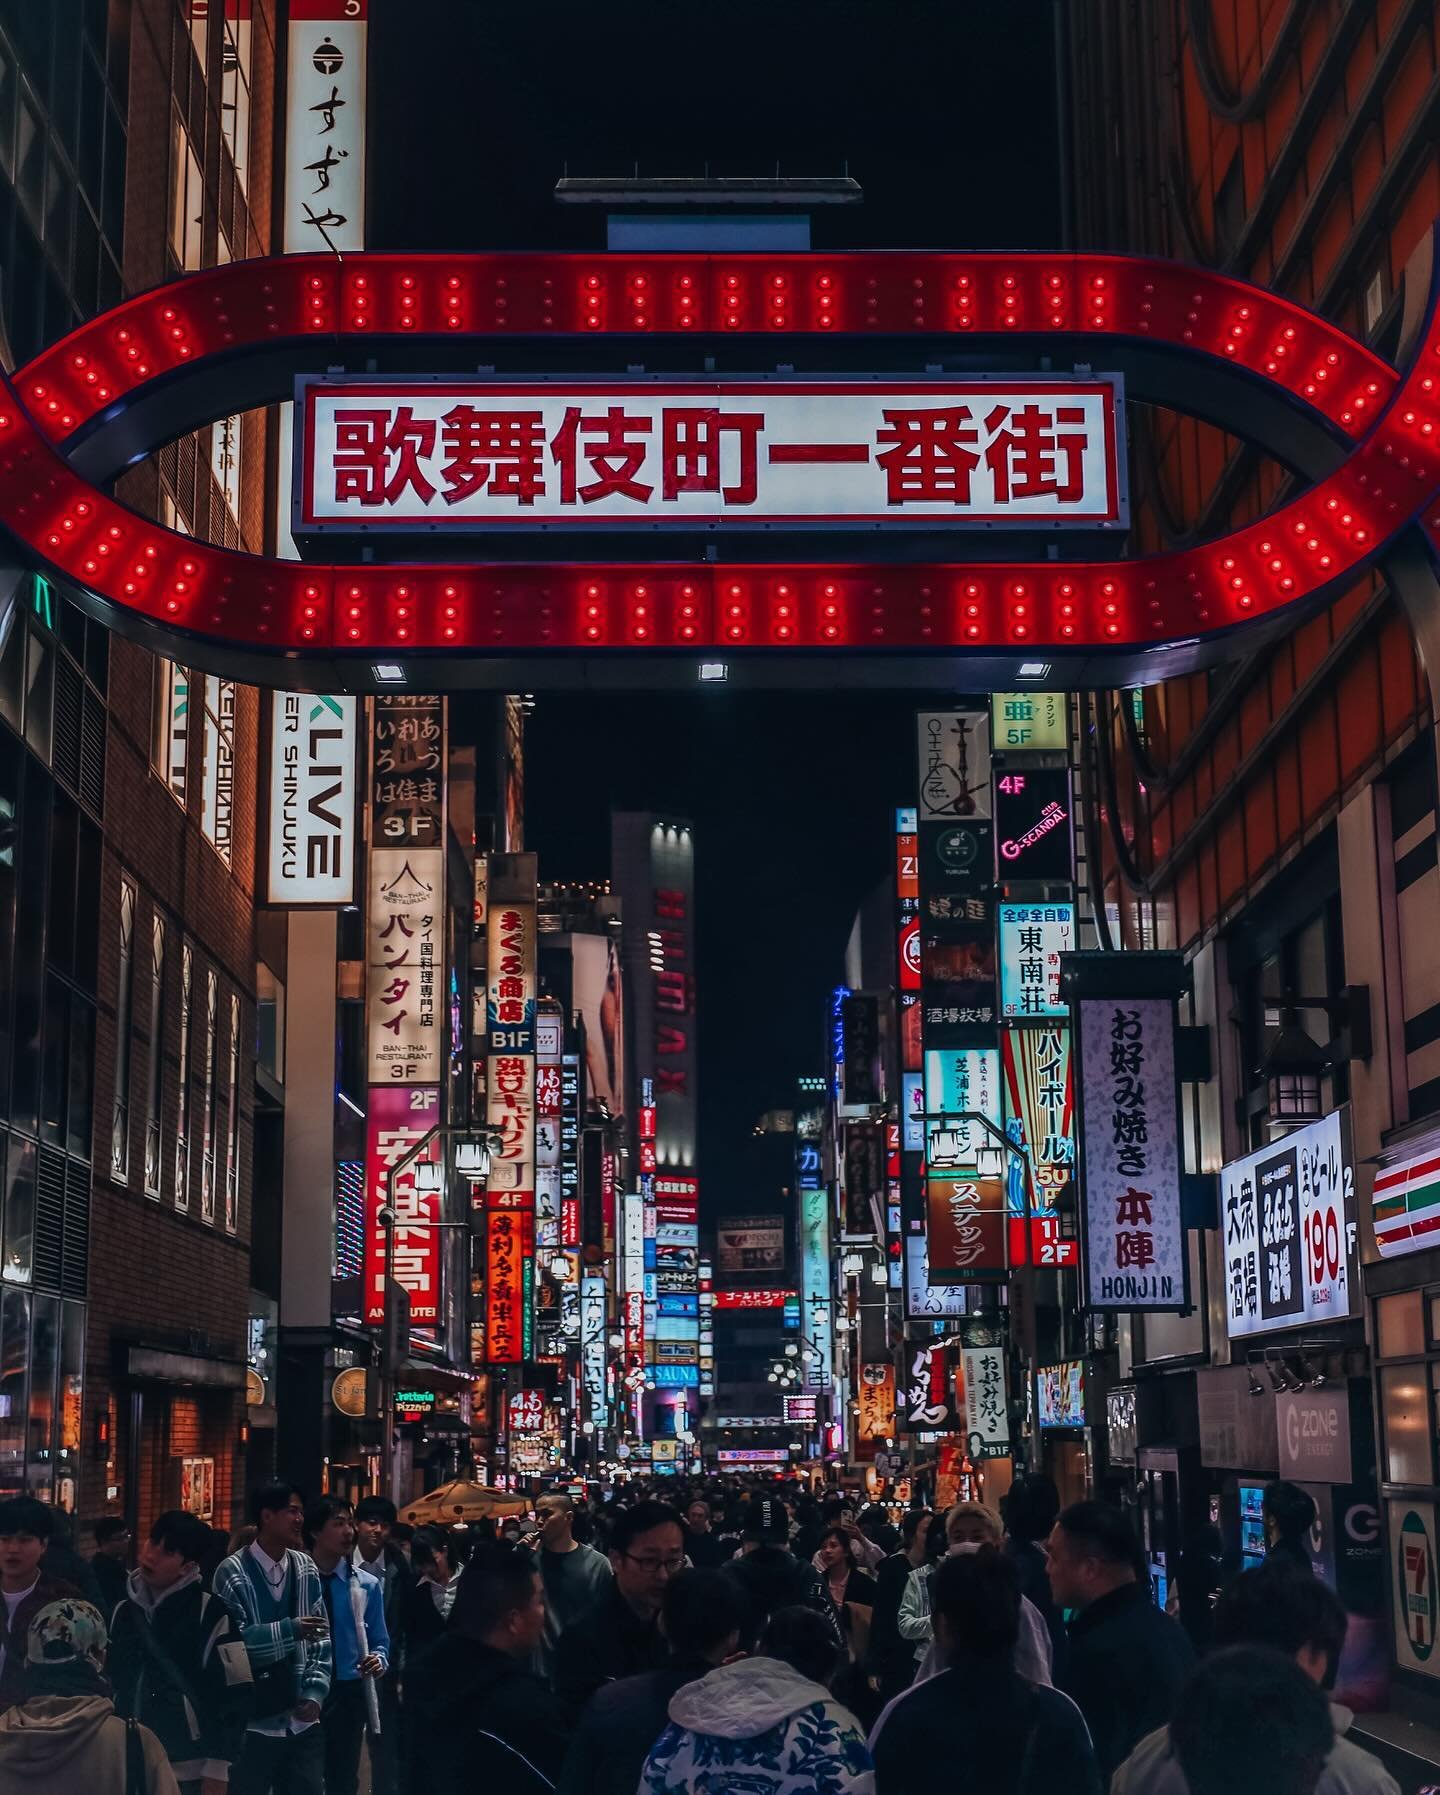 Here are three amazing streets you need to see at night in Tokyo!

1. Kabukicho Ichiban-gai in Shinjuku 
2. Omoide Yokocho in Shinjuku
3. 三番街 in Nakano Broadway

This city really does come alive at night, and it&rsquo;s something you don&rsquo;t want